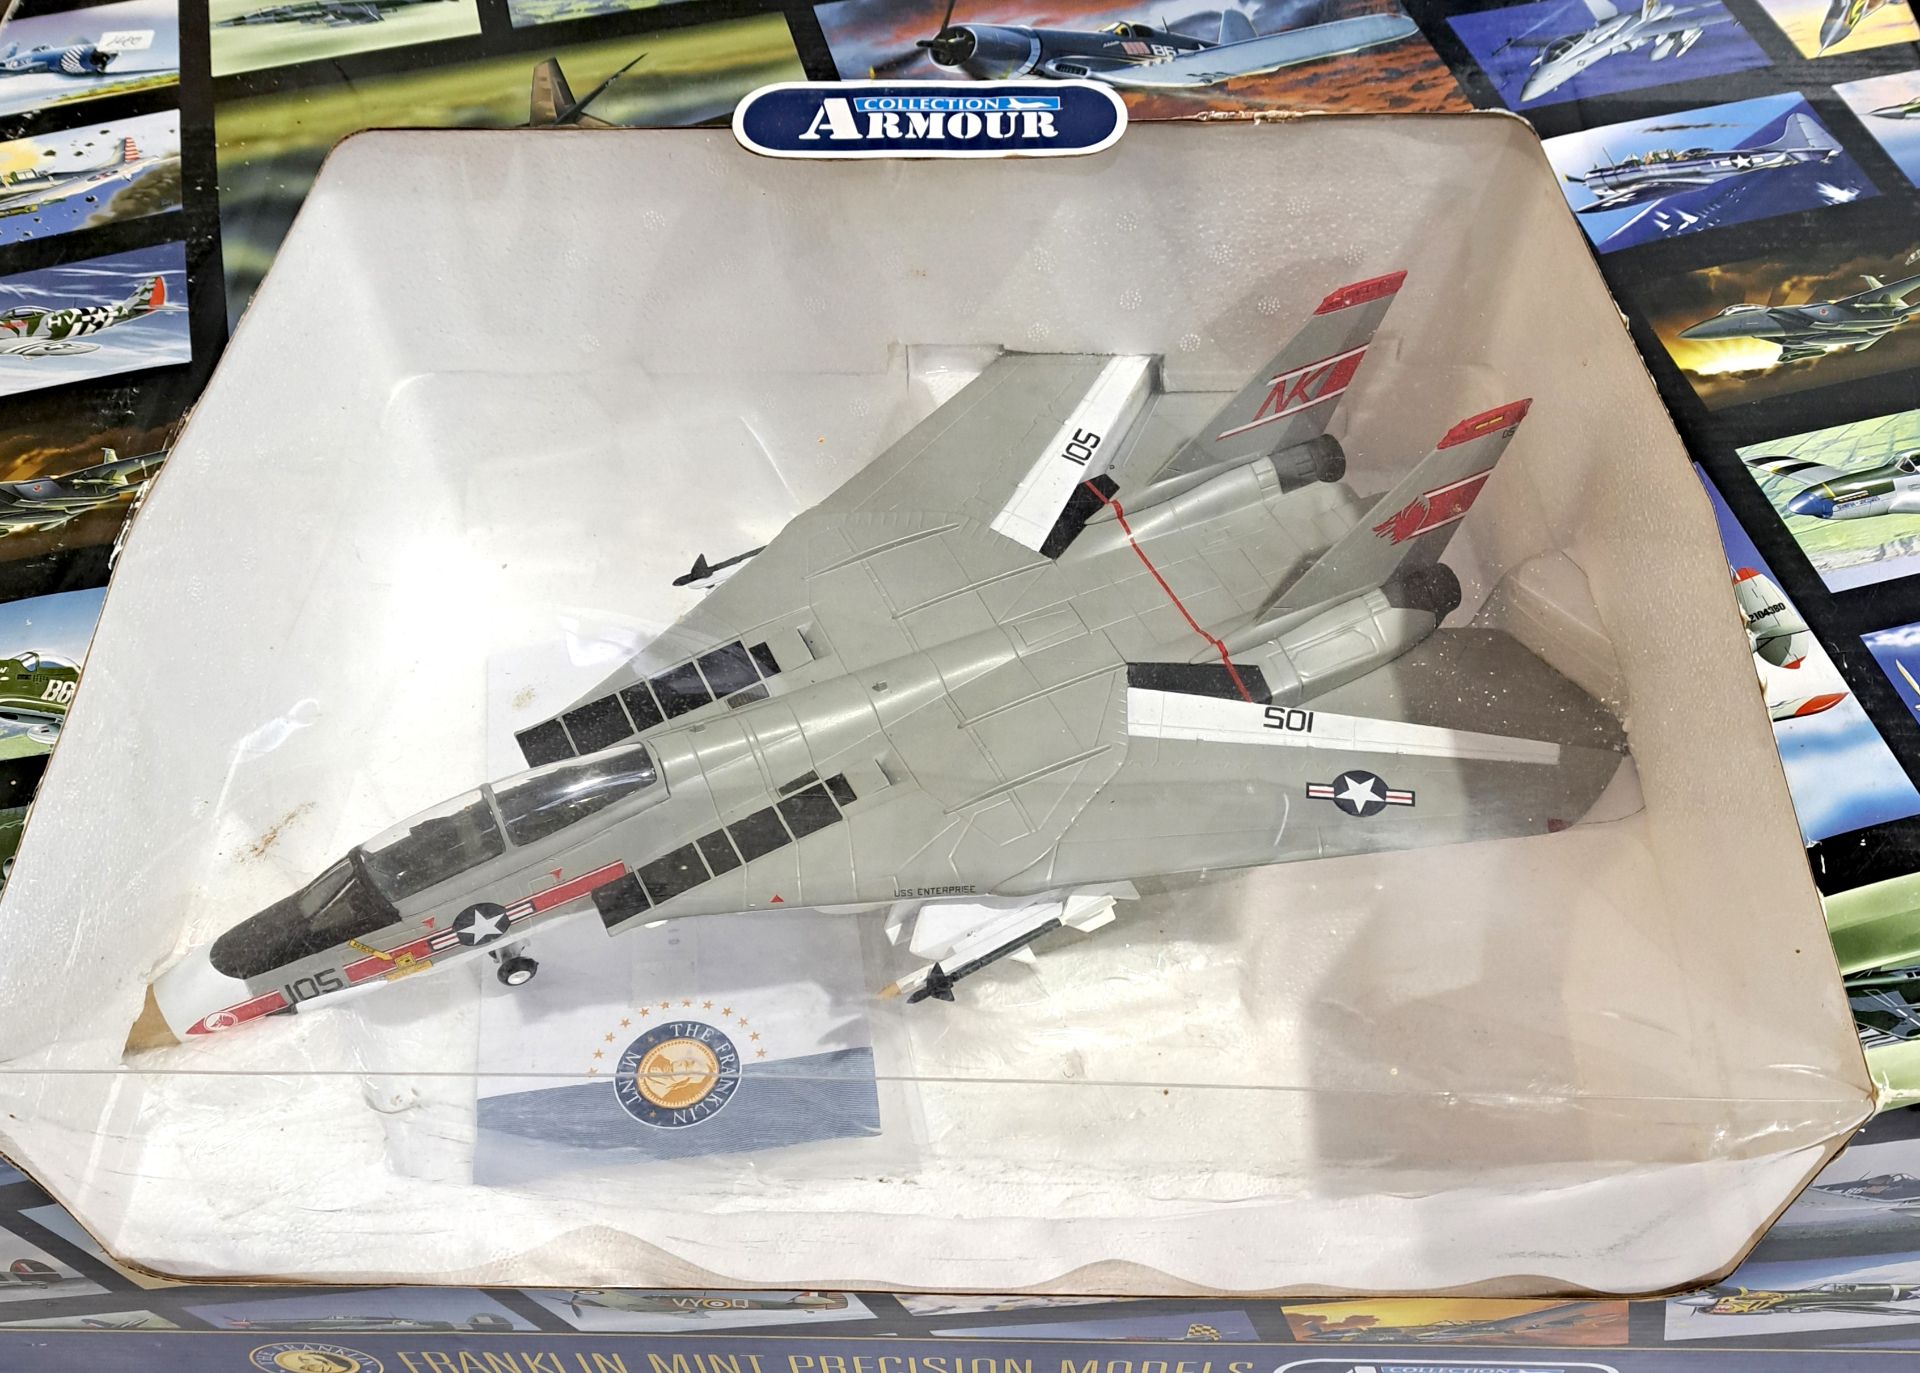 Franklin Mint  "Armour Collection", a boxed 1:48 scale B11B593 F14 Tomcat VF1 Wolfpack. - Image 2 of 2